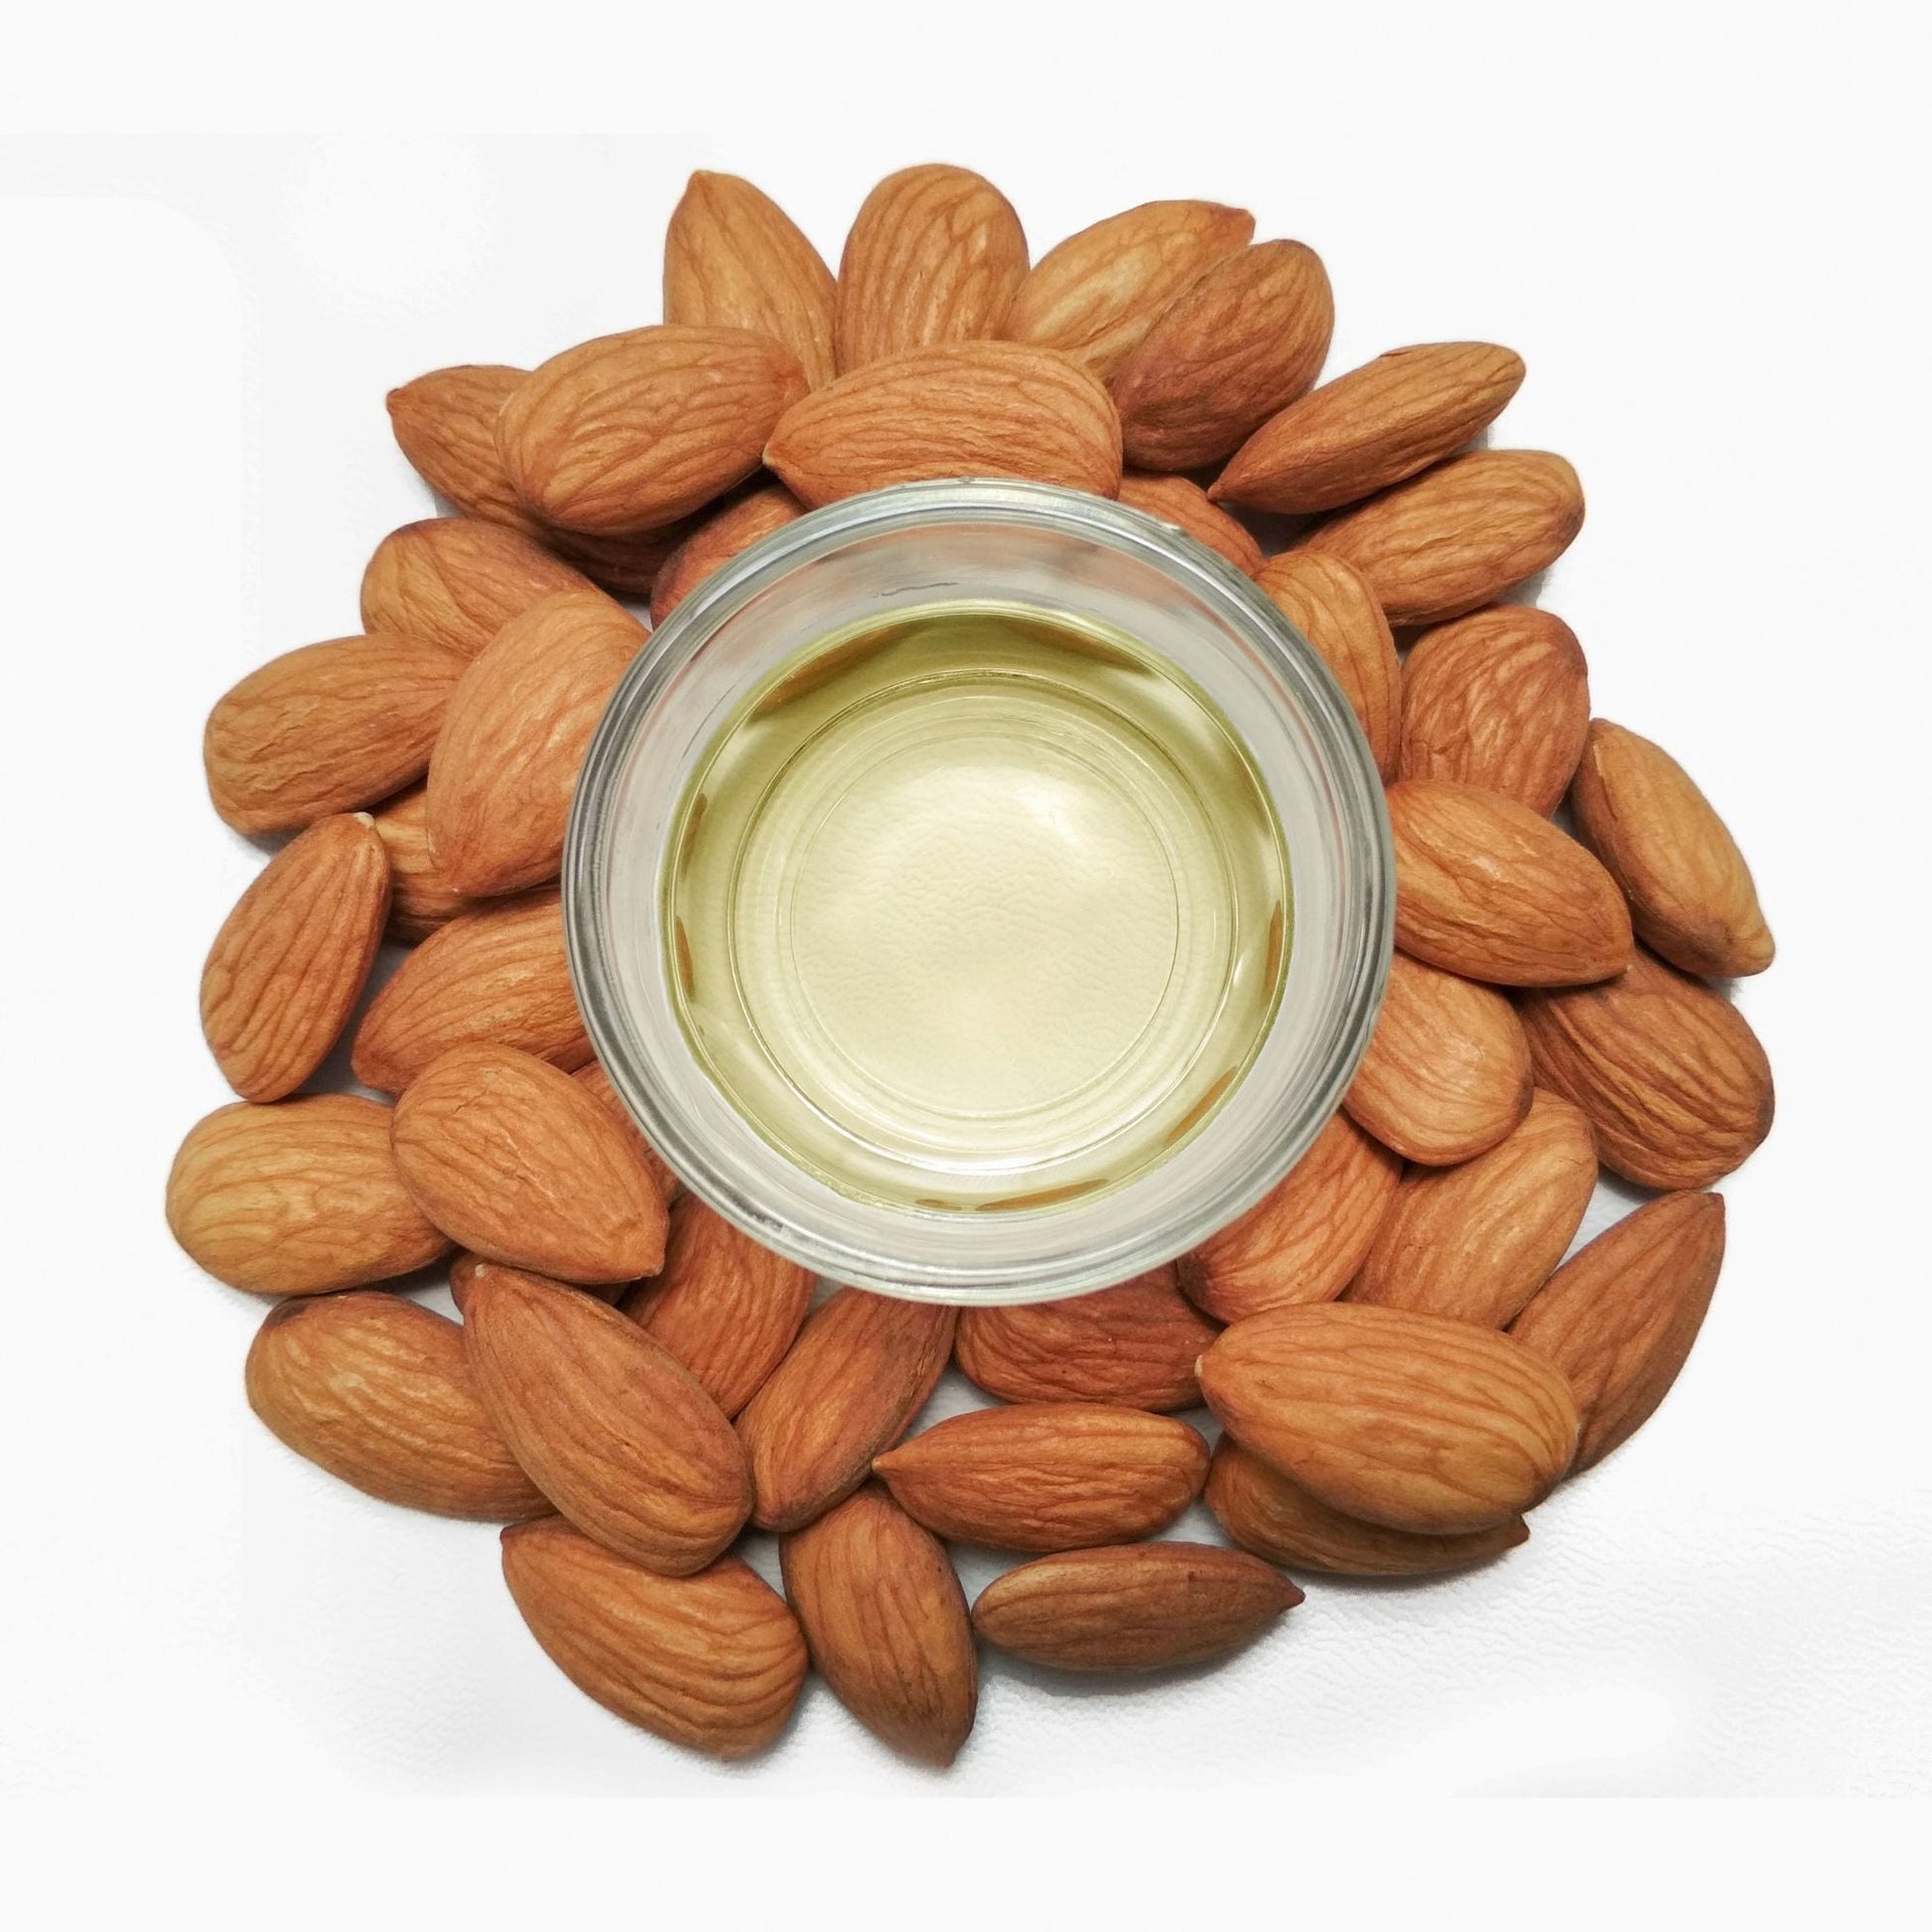 5L Sweet Almond Oil Refined Cosmetic Grade 100% Pure - Skin Face Hair Massage